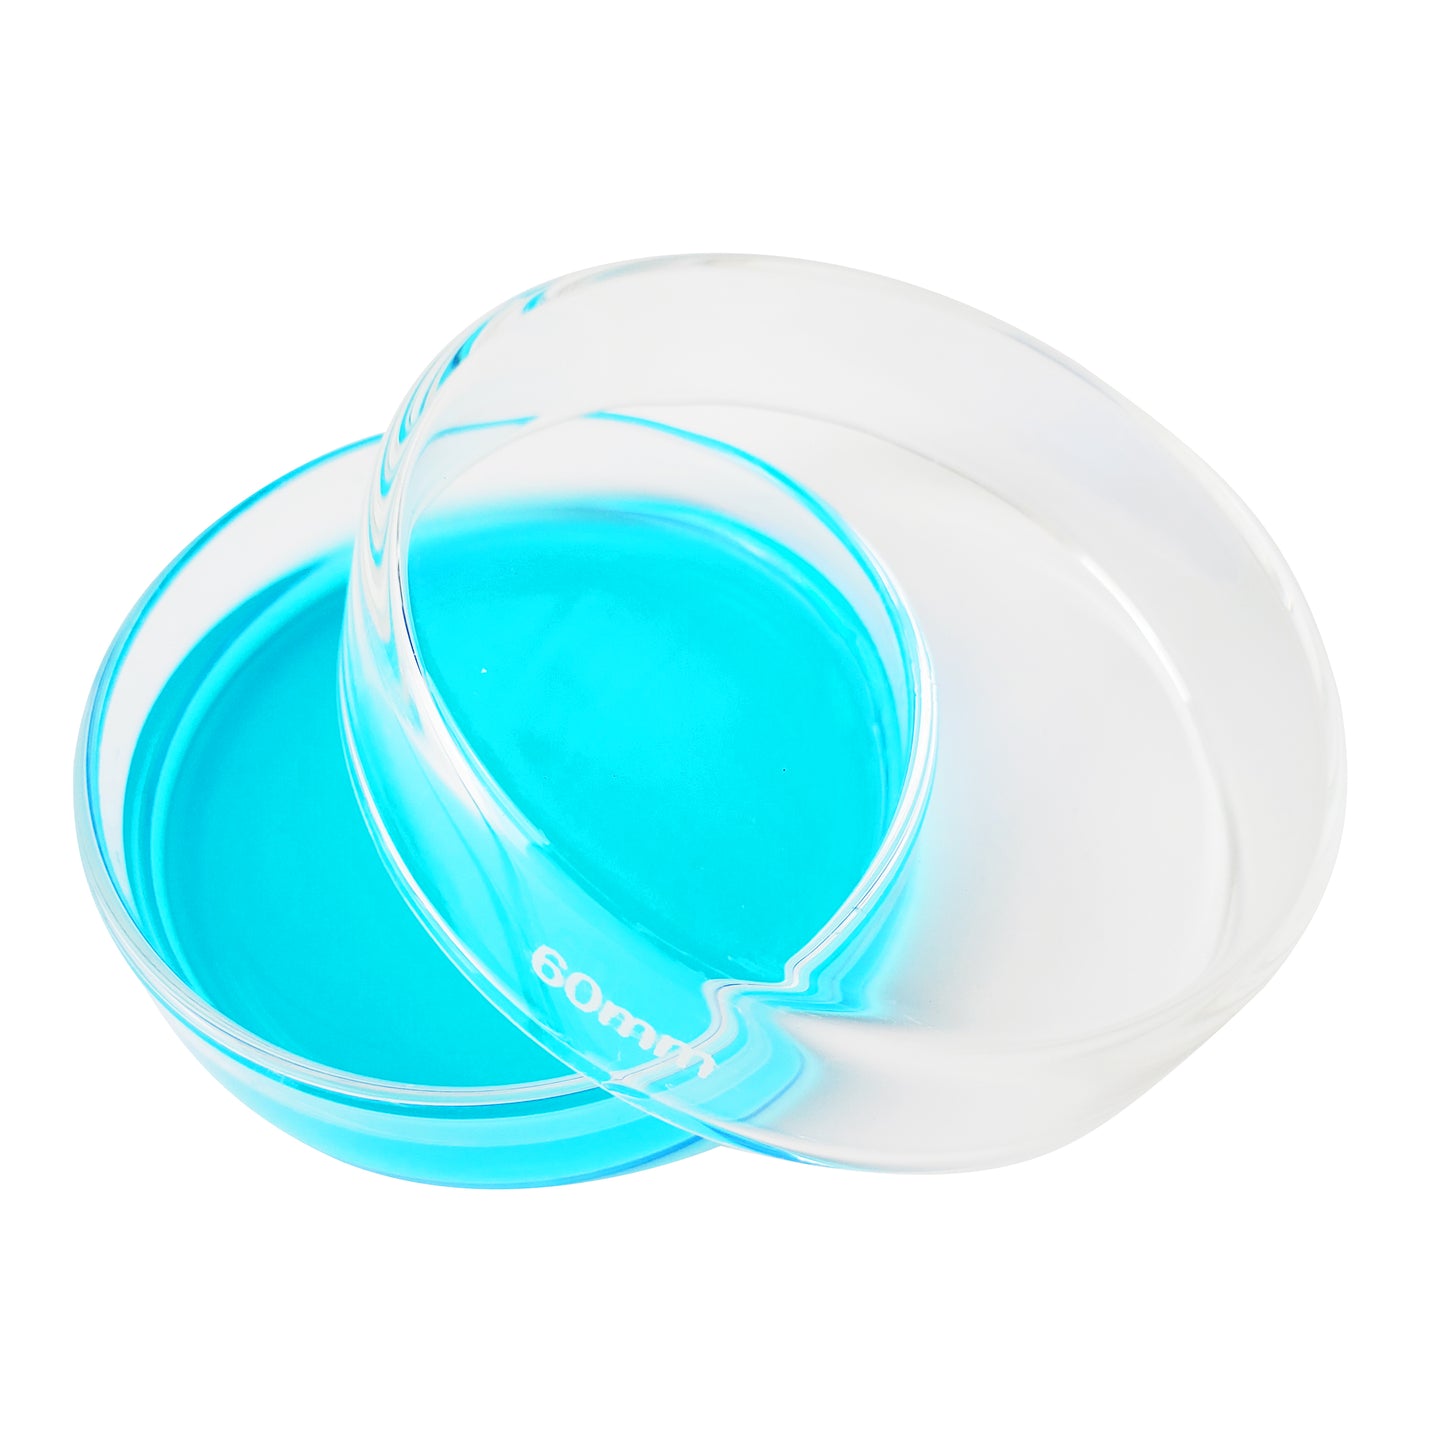 90mm OD Glass Petri Dish with Lid (Pack of 10)